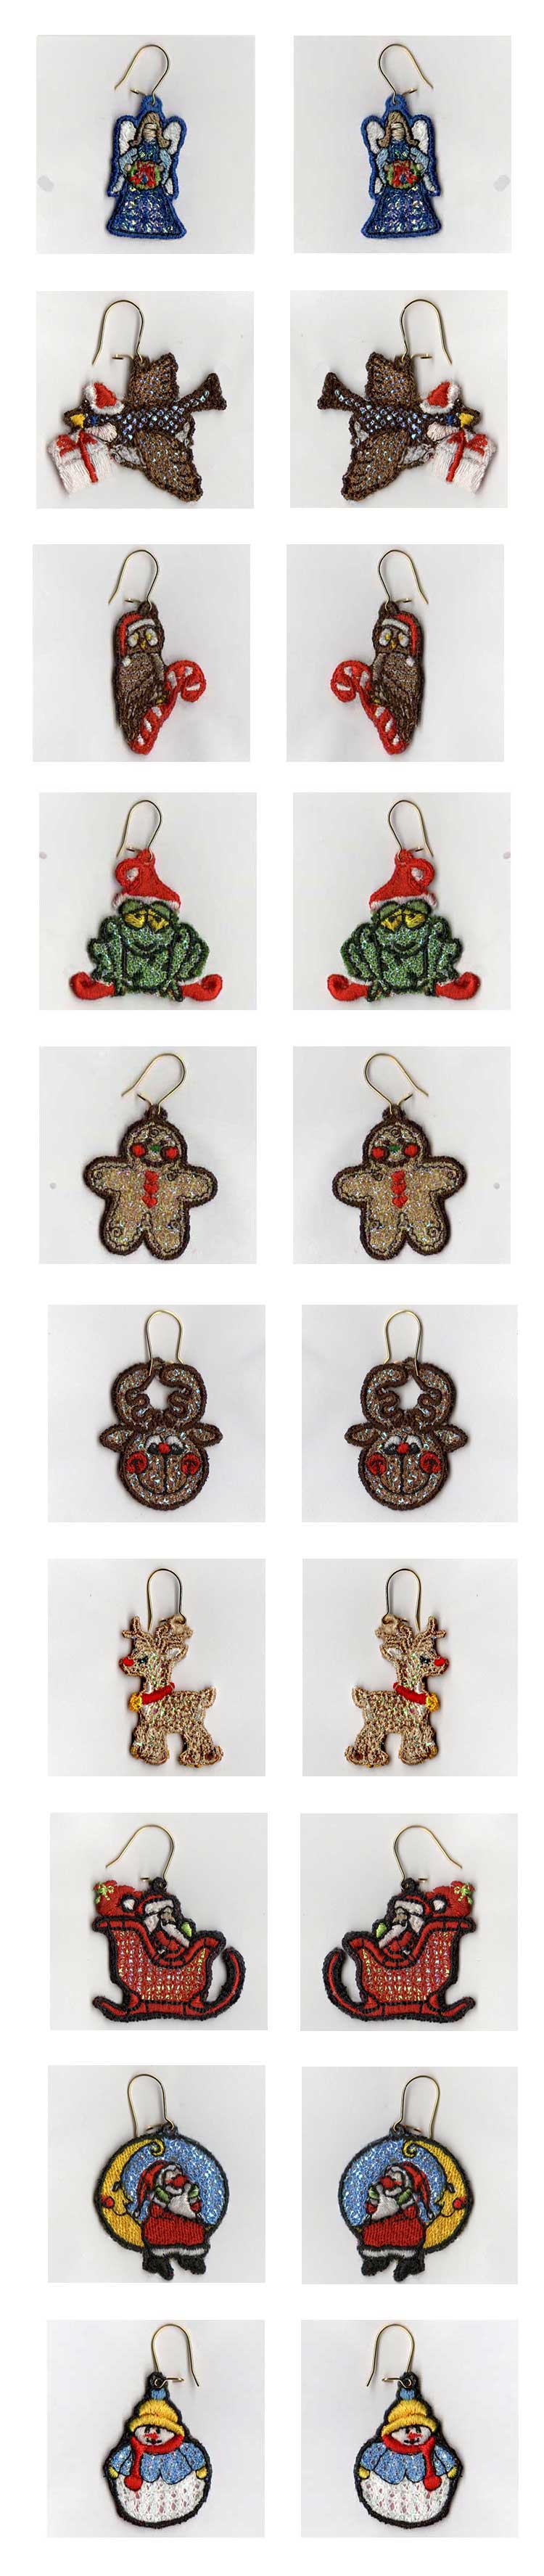 Free Standing Lace Mylar Holiday Earrings v2 Embroidery Machine Design Details